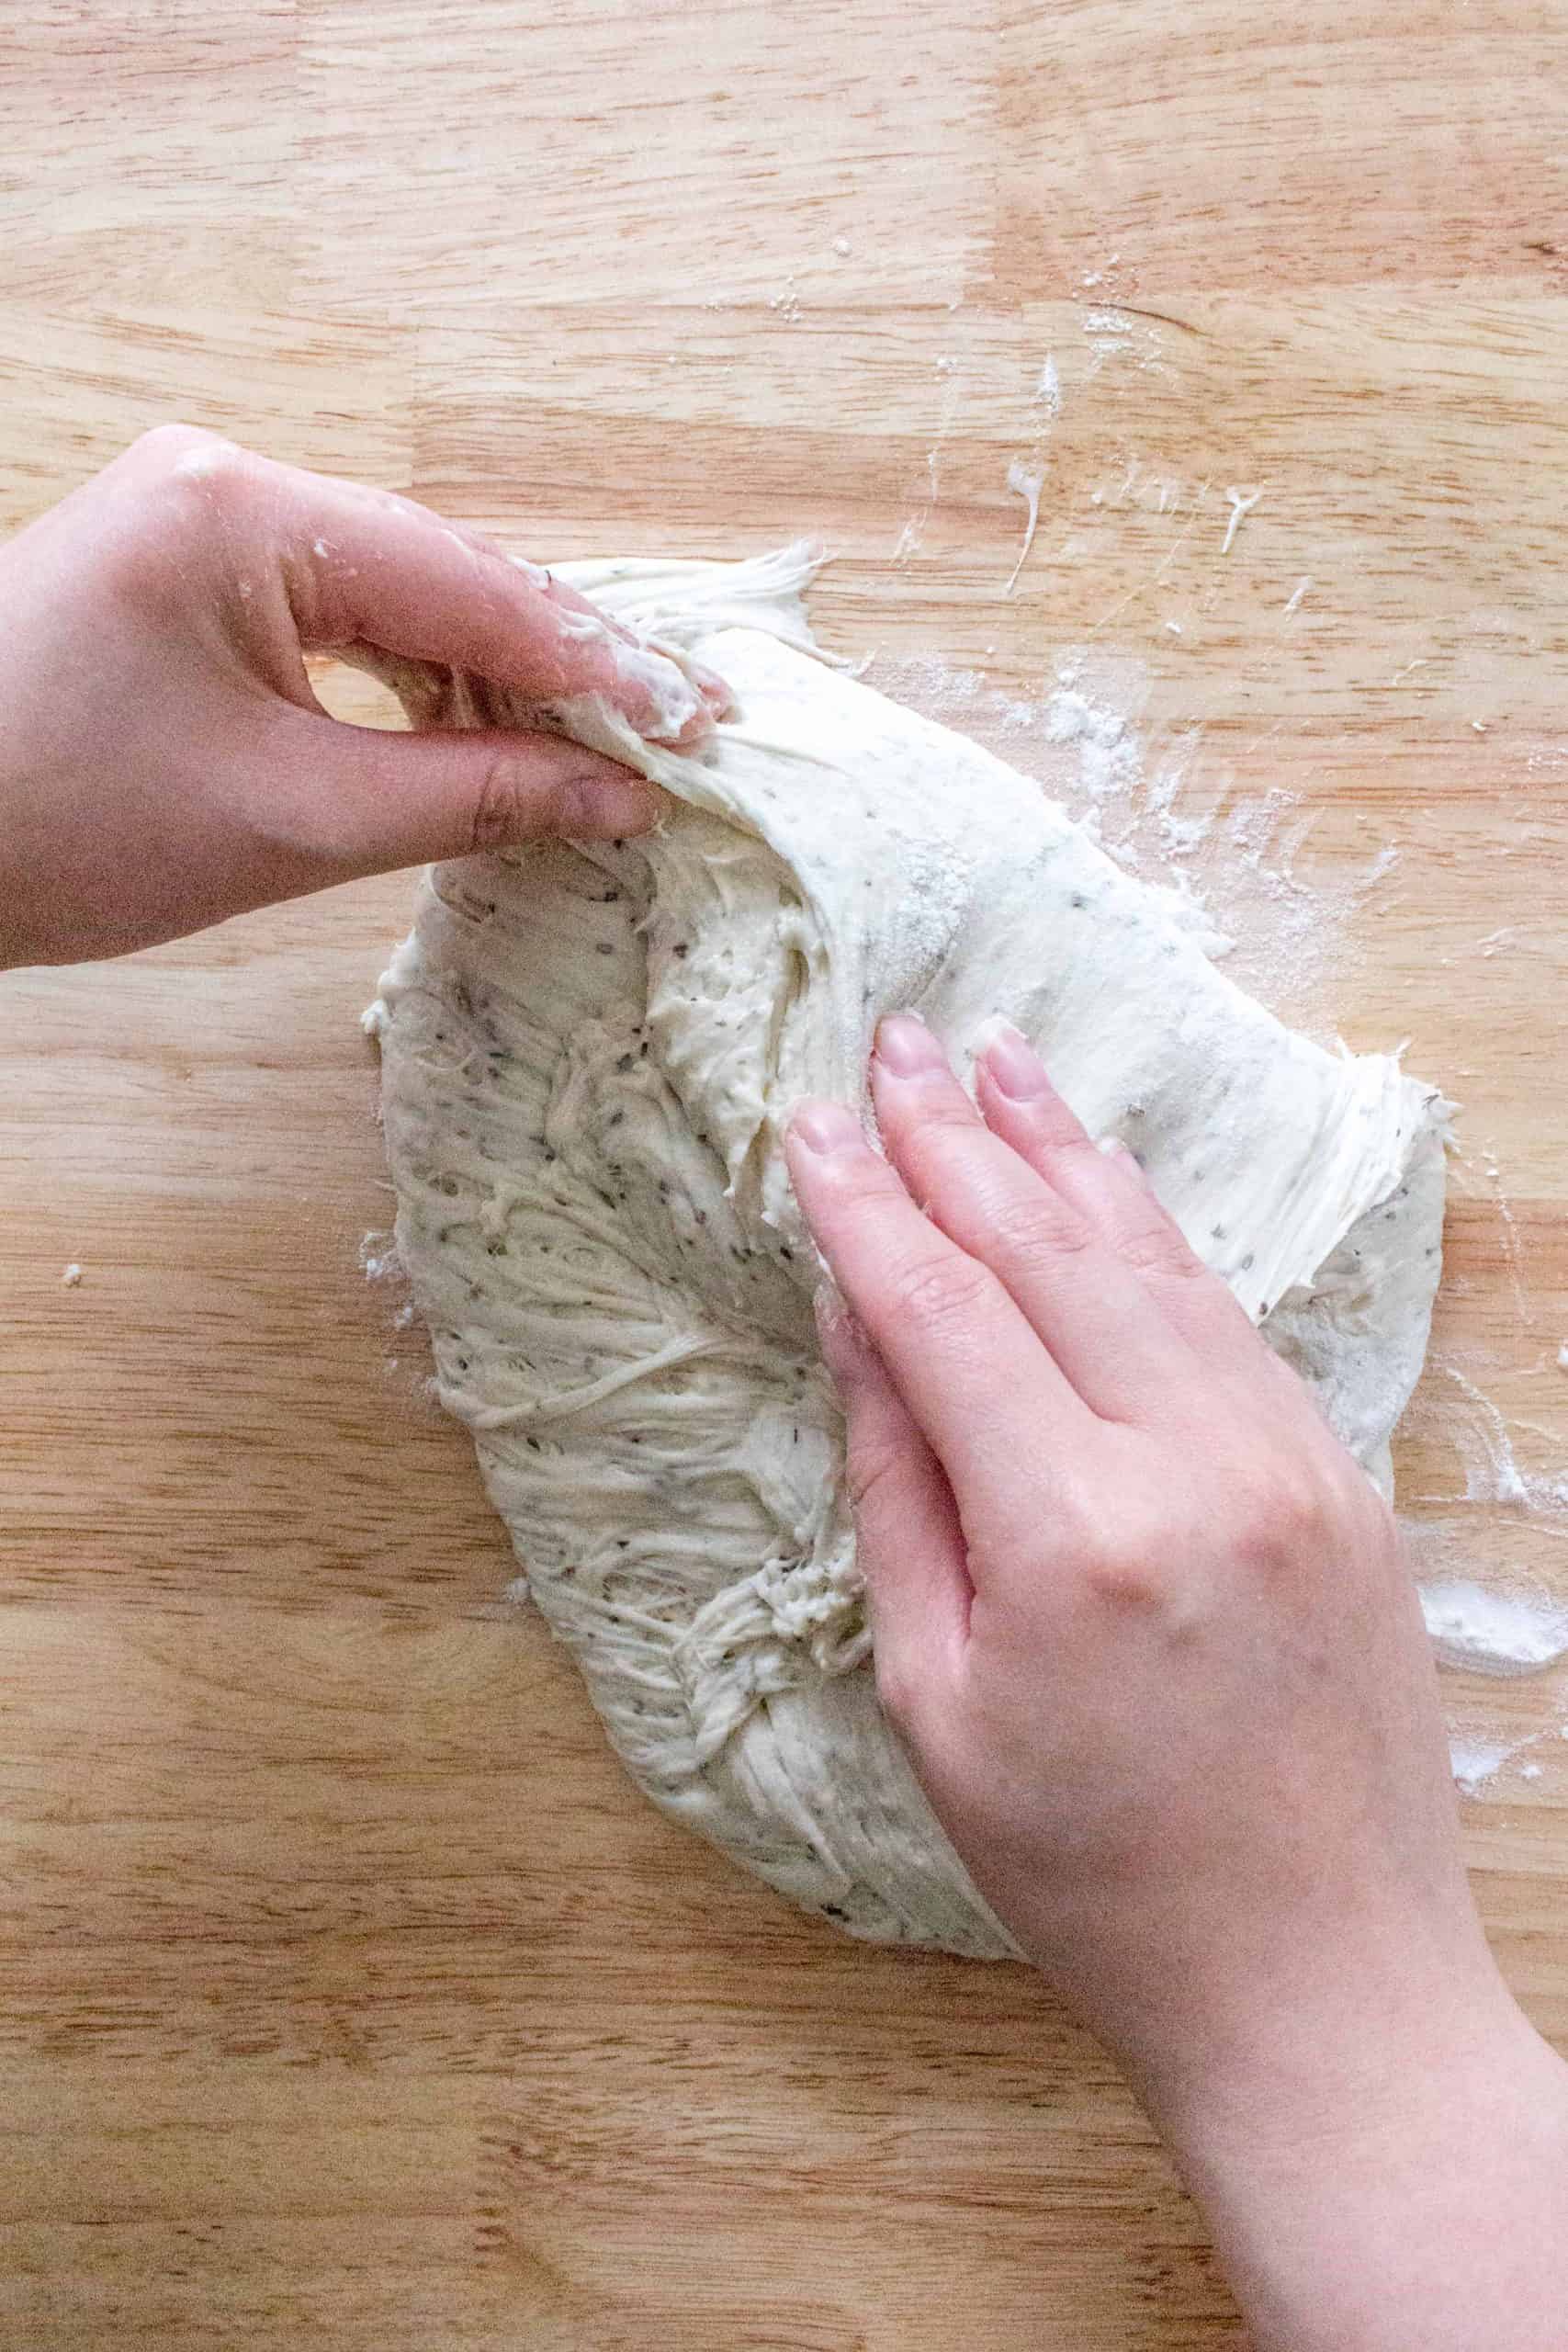 Lightly flour your kitchen counter, gently remove the dough from the bowl onto the counter, and gently fold the dough into a round ball. I fold the dough from the sides and gently tuck the bottoms in with my fingertips.